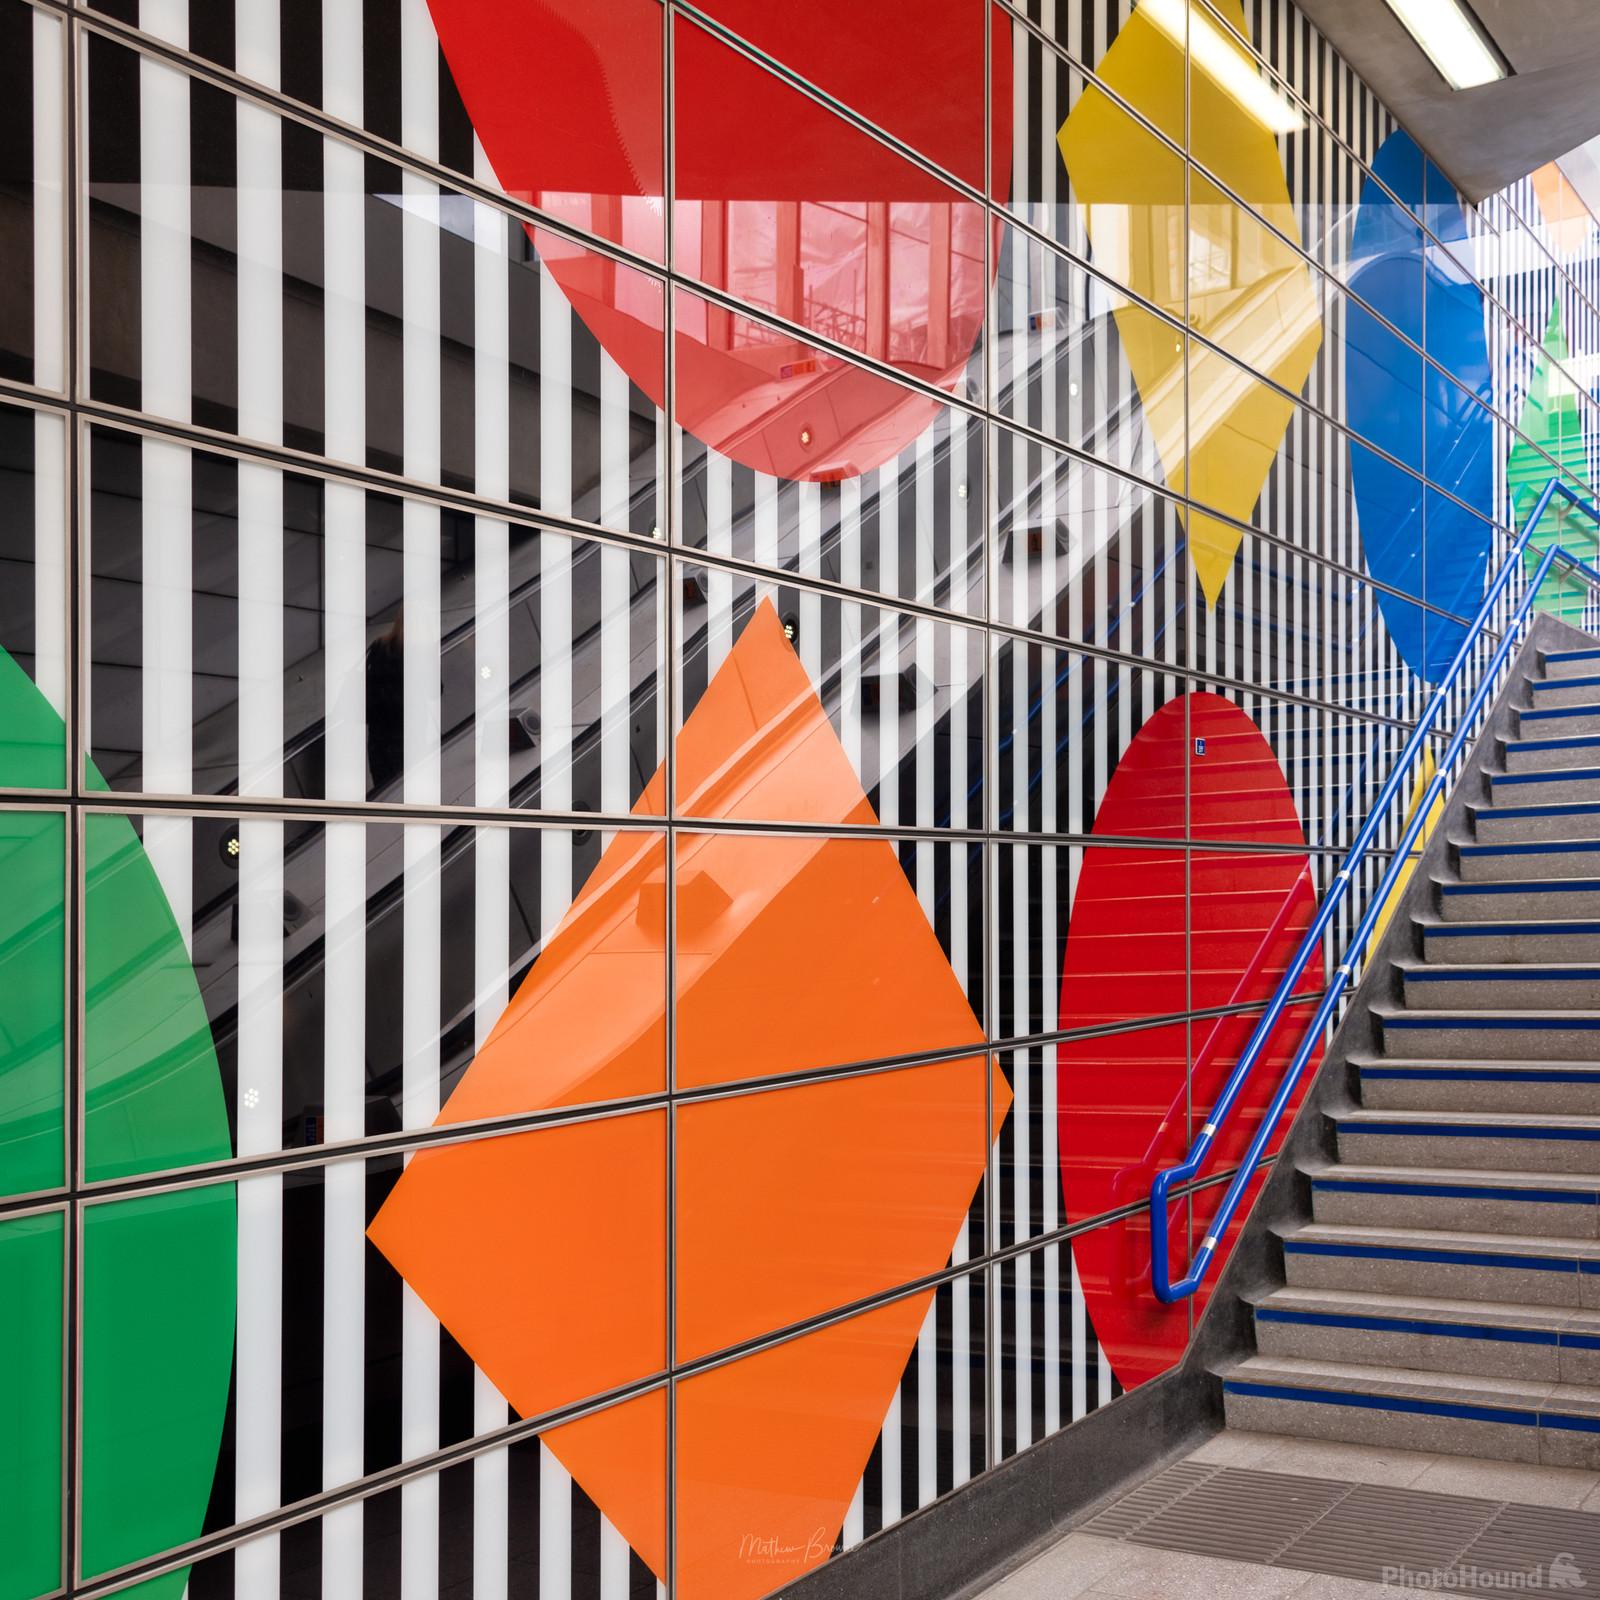 Image of Tottenham Court Road Tube Station by Mathew Browne